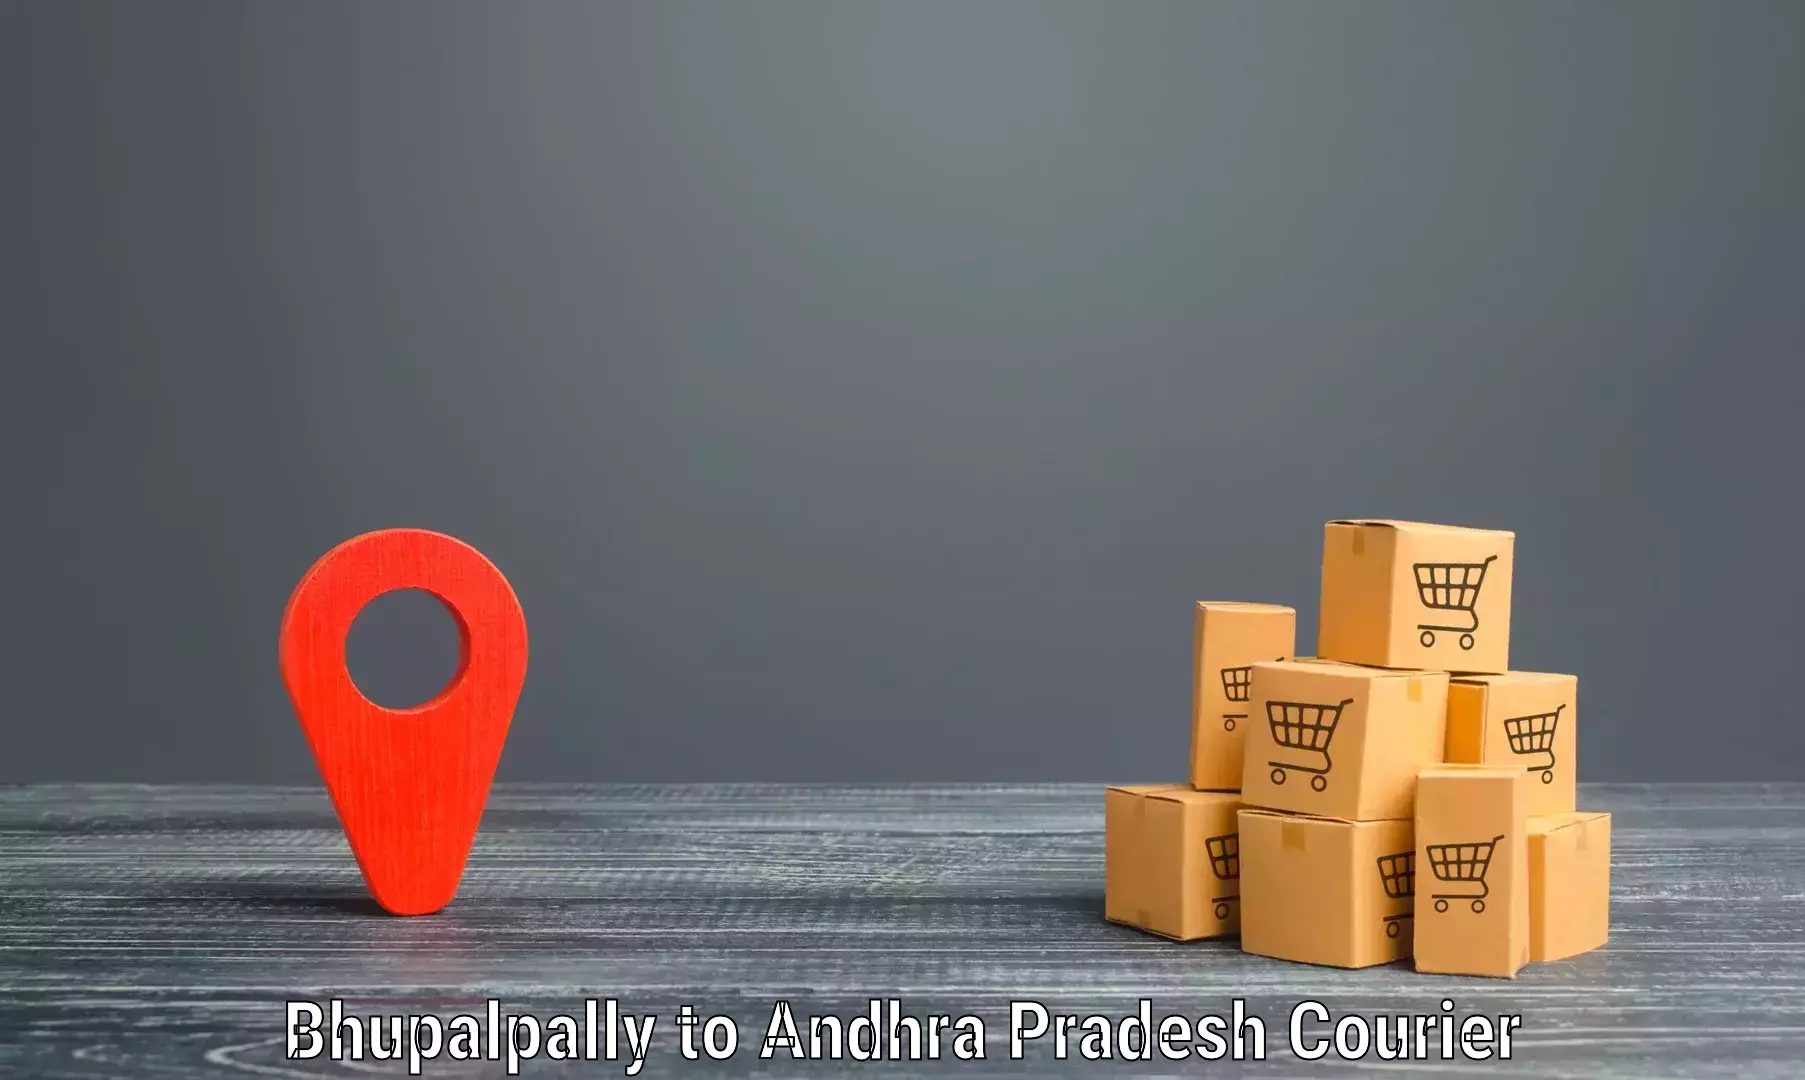 Next-day delivery options Bhupalpally to IIT Tirupati